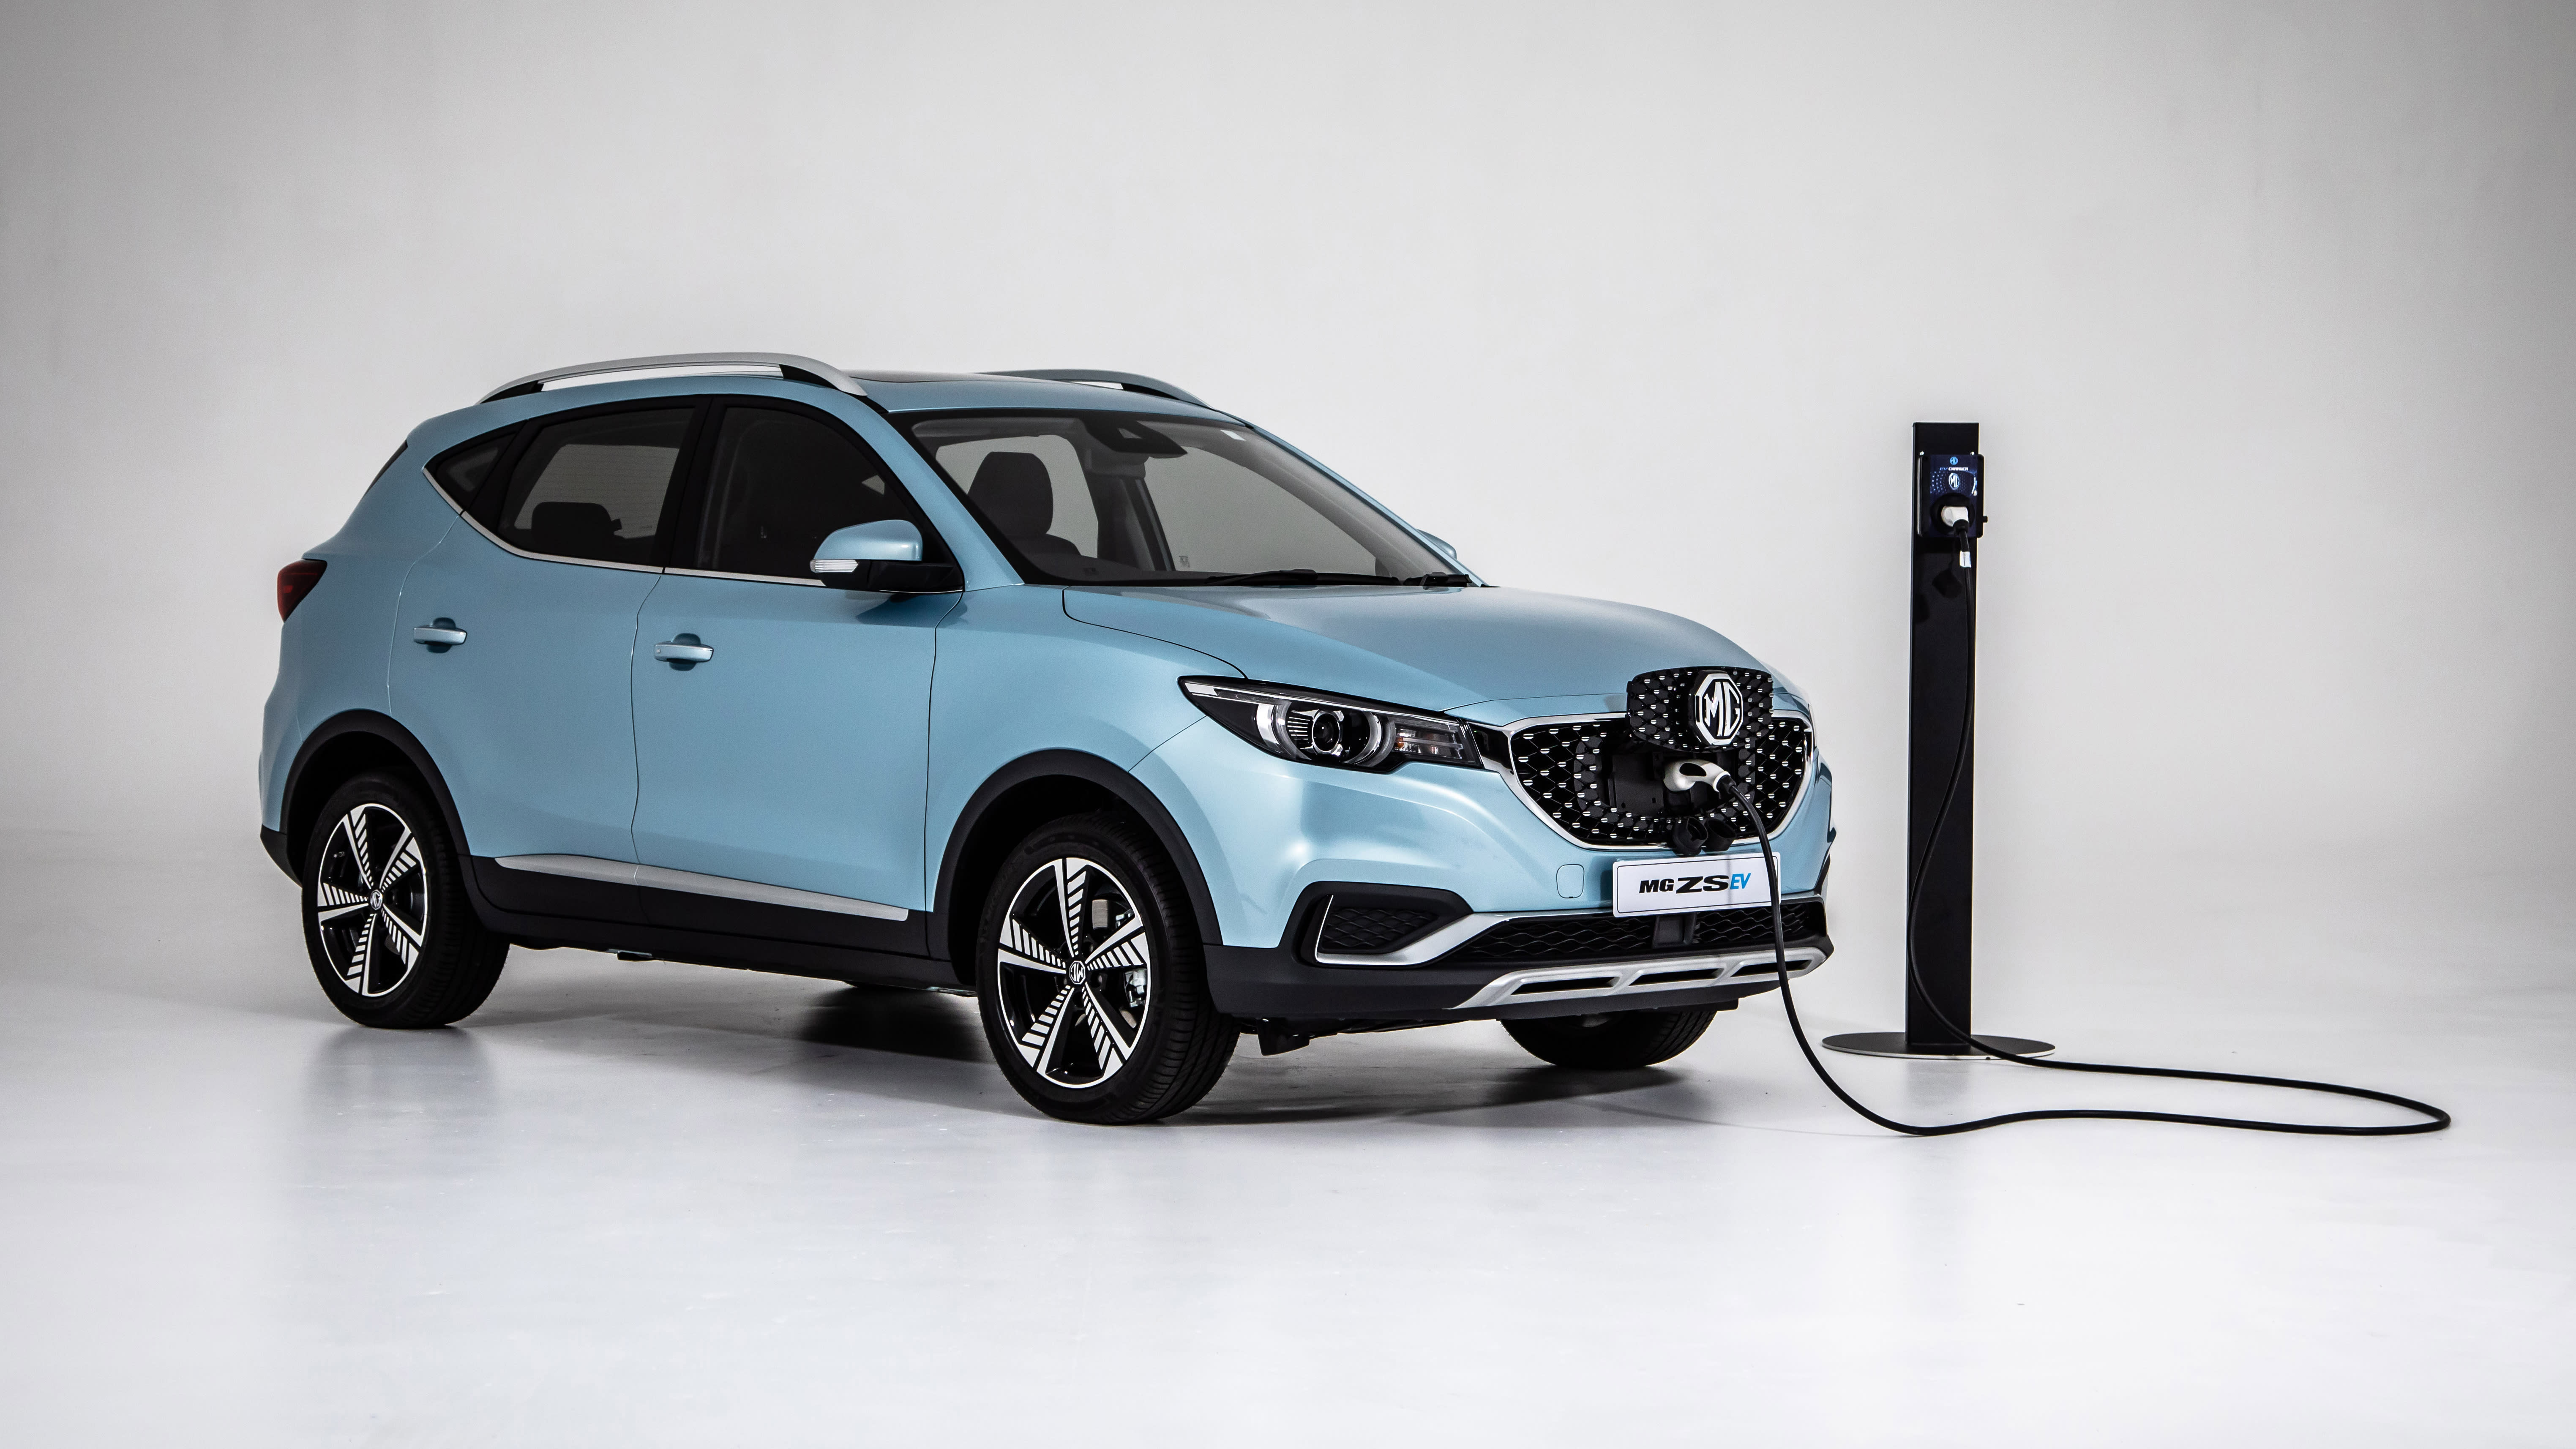 Ev Cars Australia Prices The Cheapest Electric Vehicle In Australia Launches